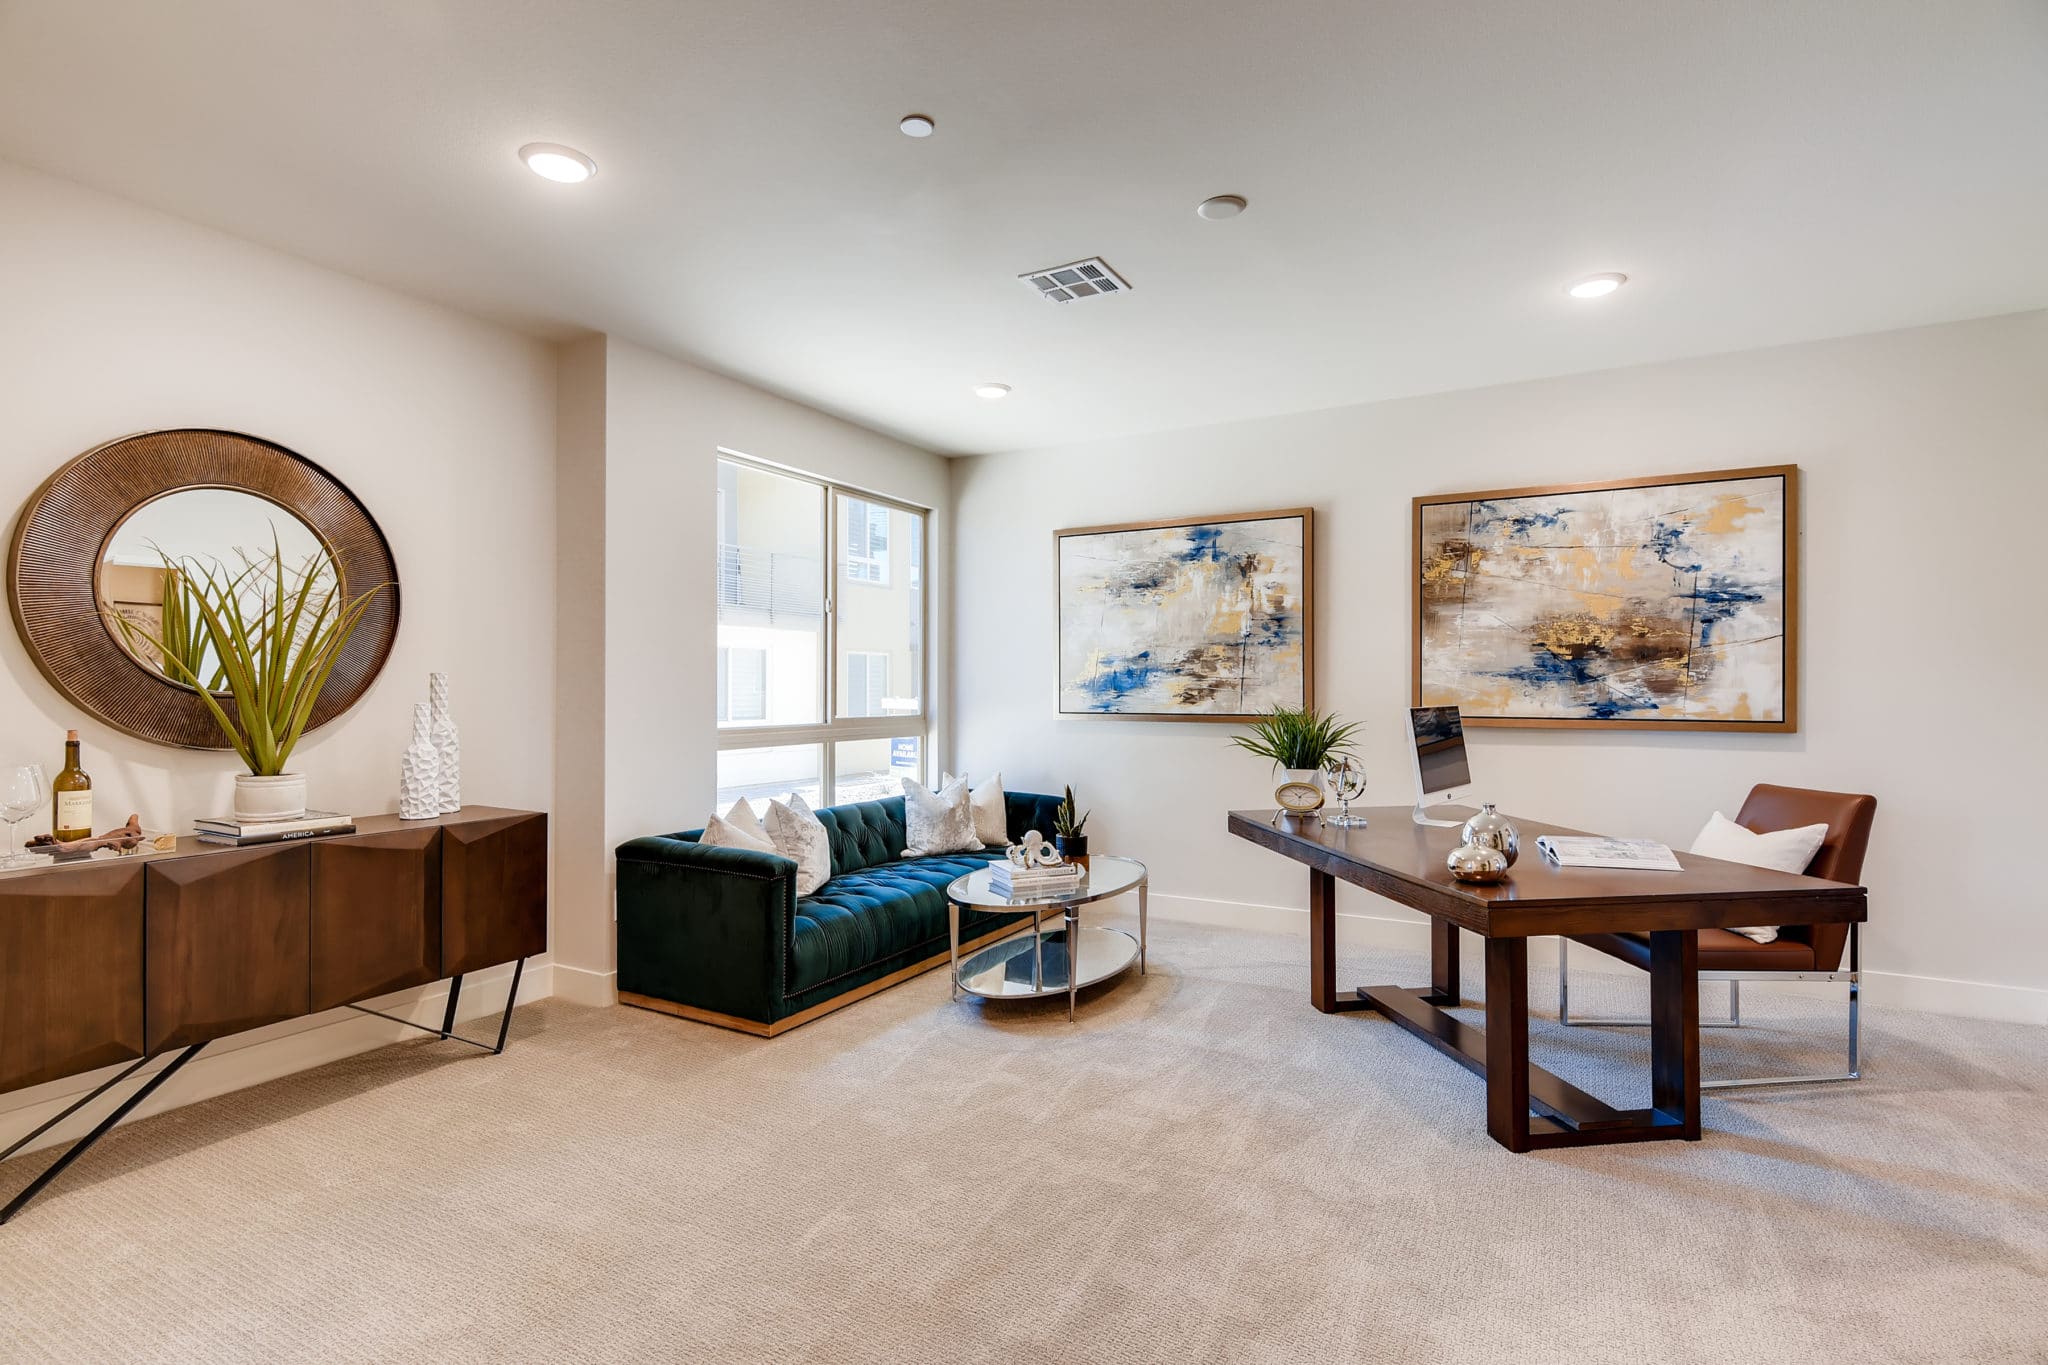 Guest Suite in Inspire in Modern Collection in Trilogy by Shea Homes in South Square in Summerlin